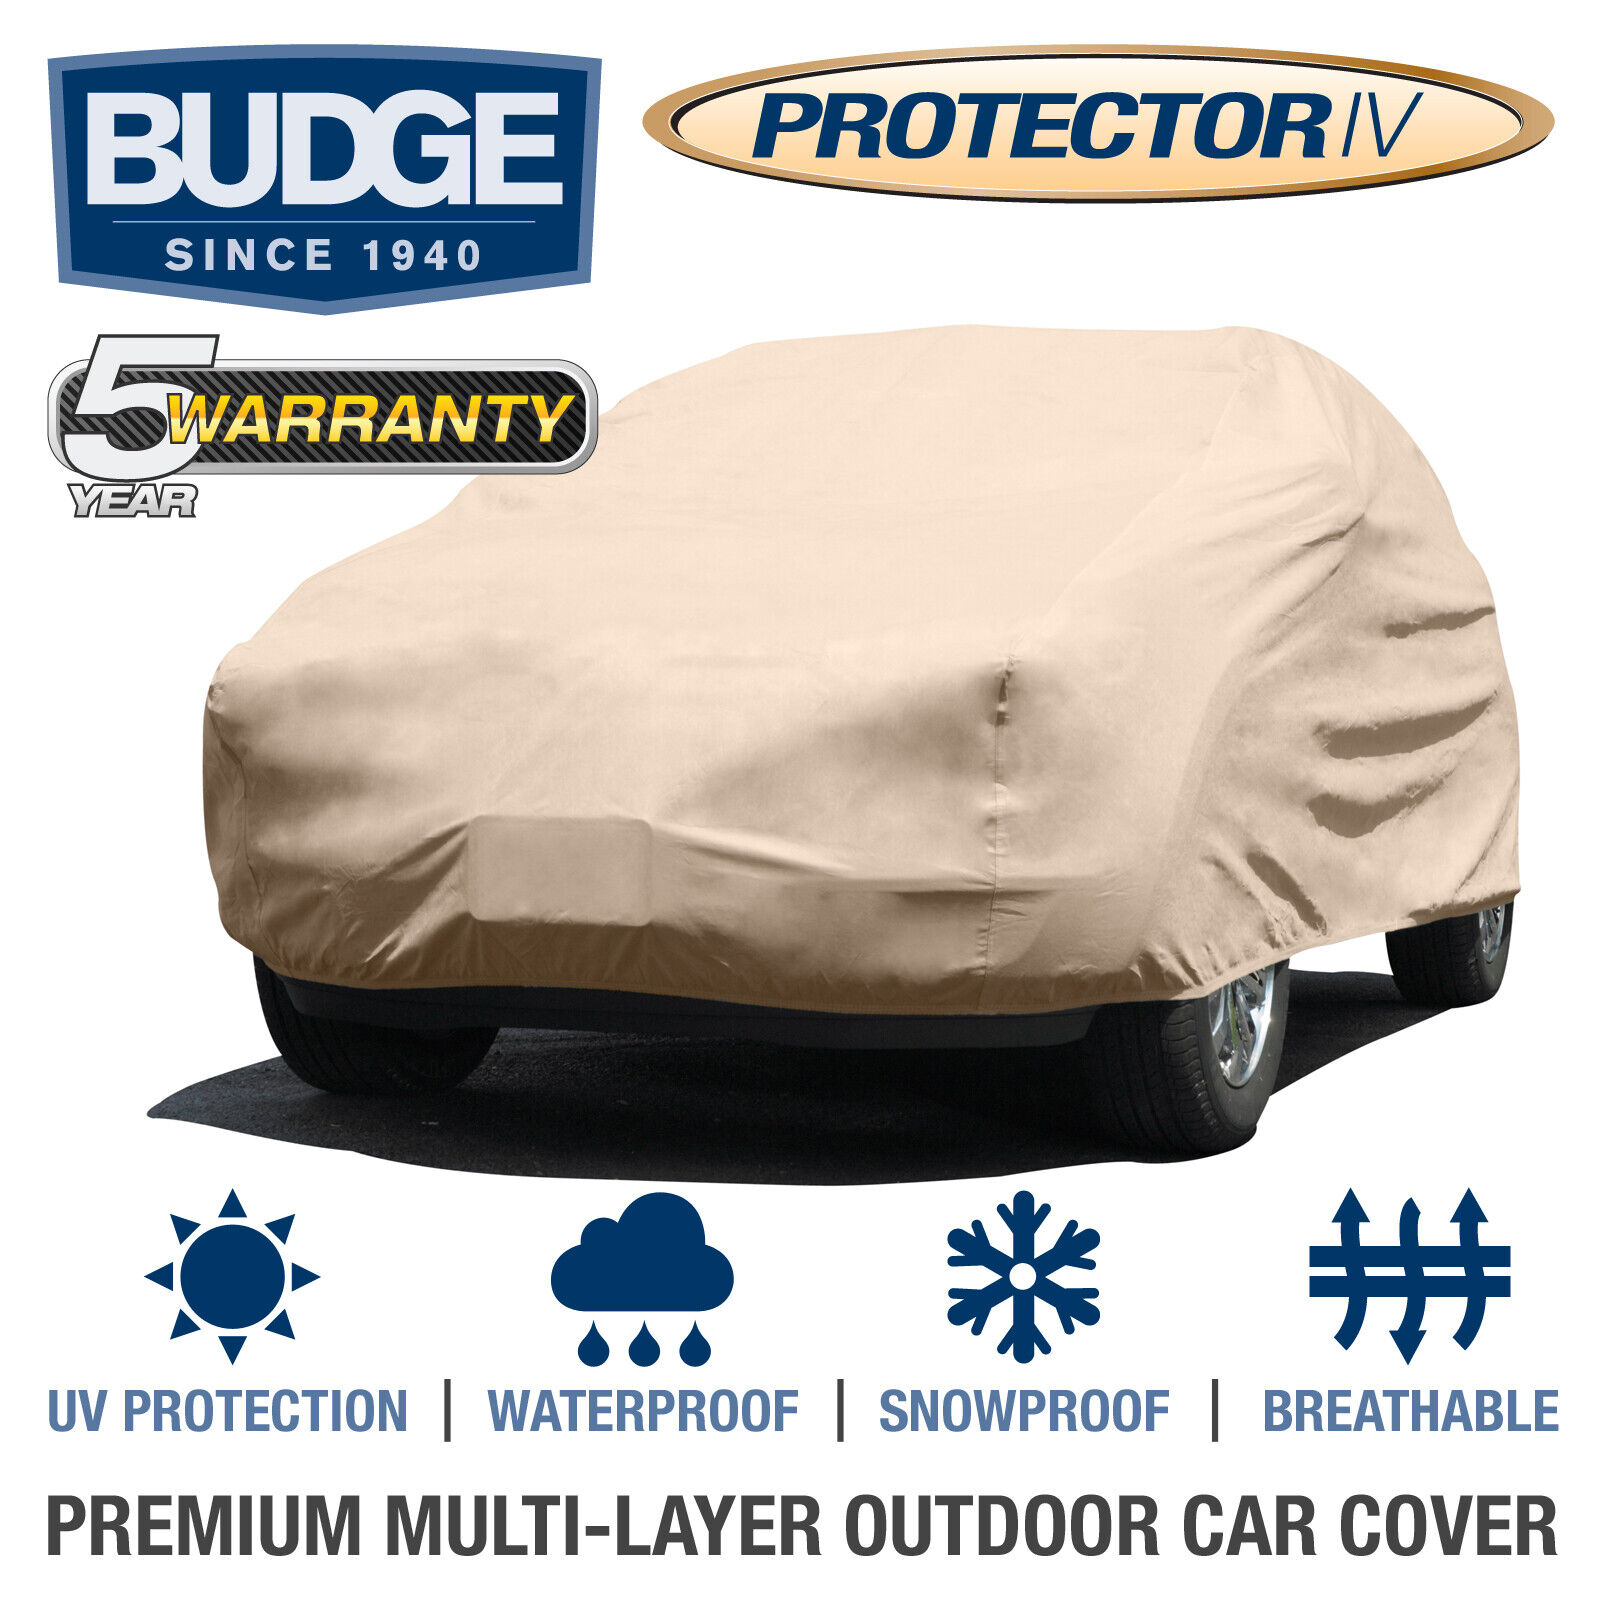 Budge Protector IV SUV Cover Fits Jeep Grand Wagoneer 1989|Waterproof|Breathable